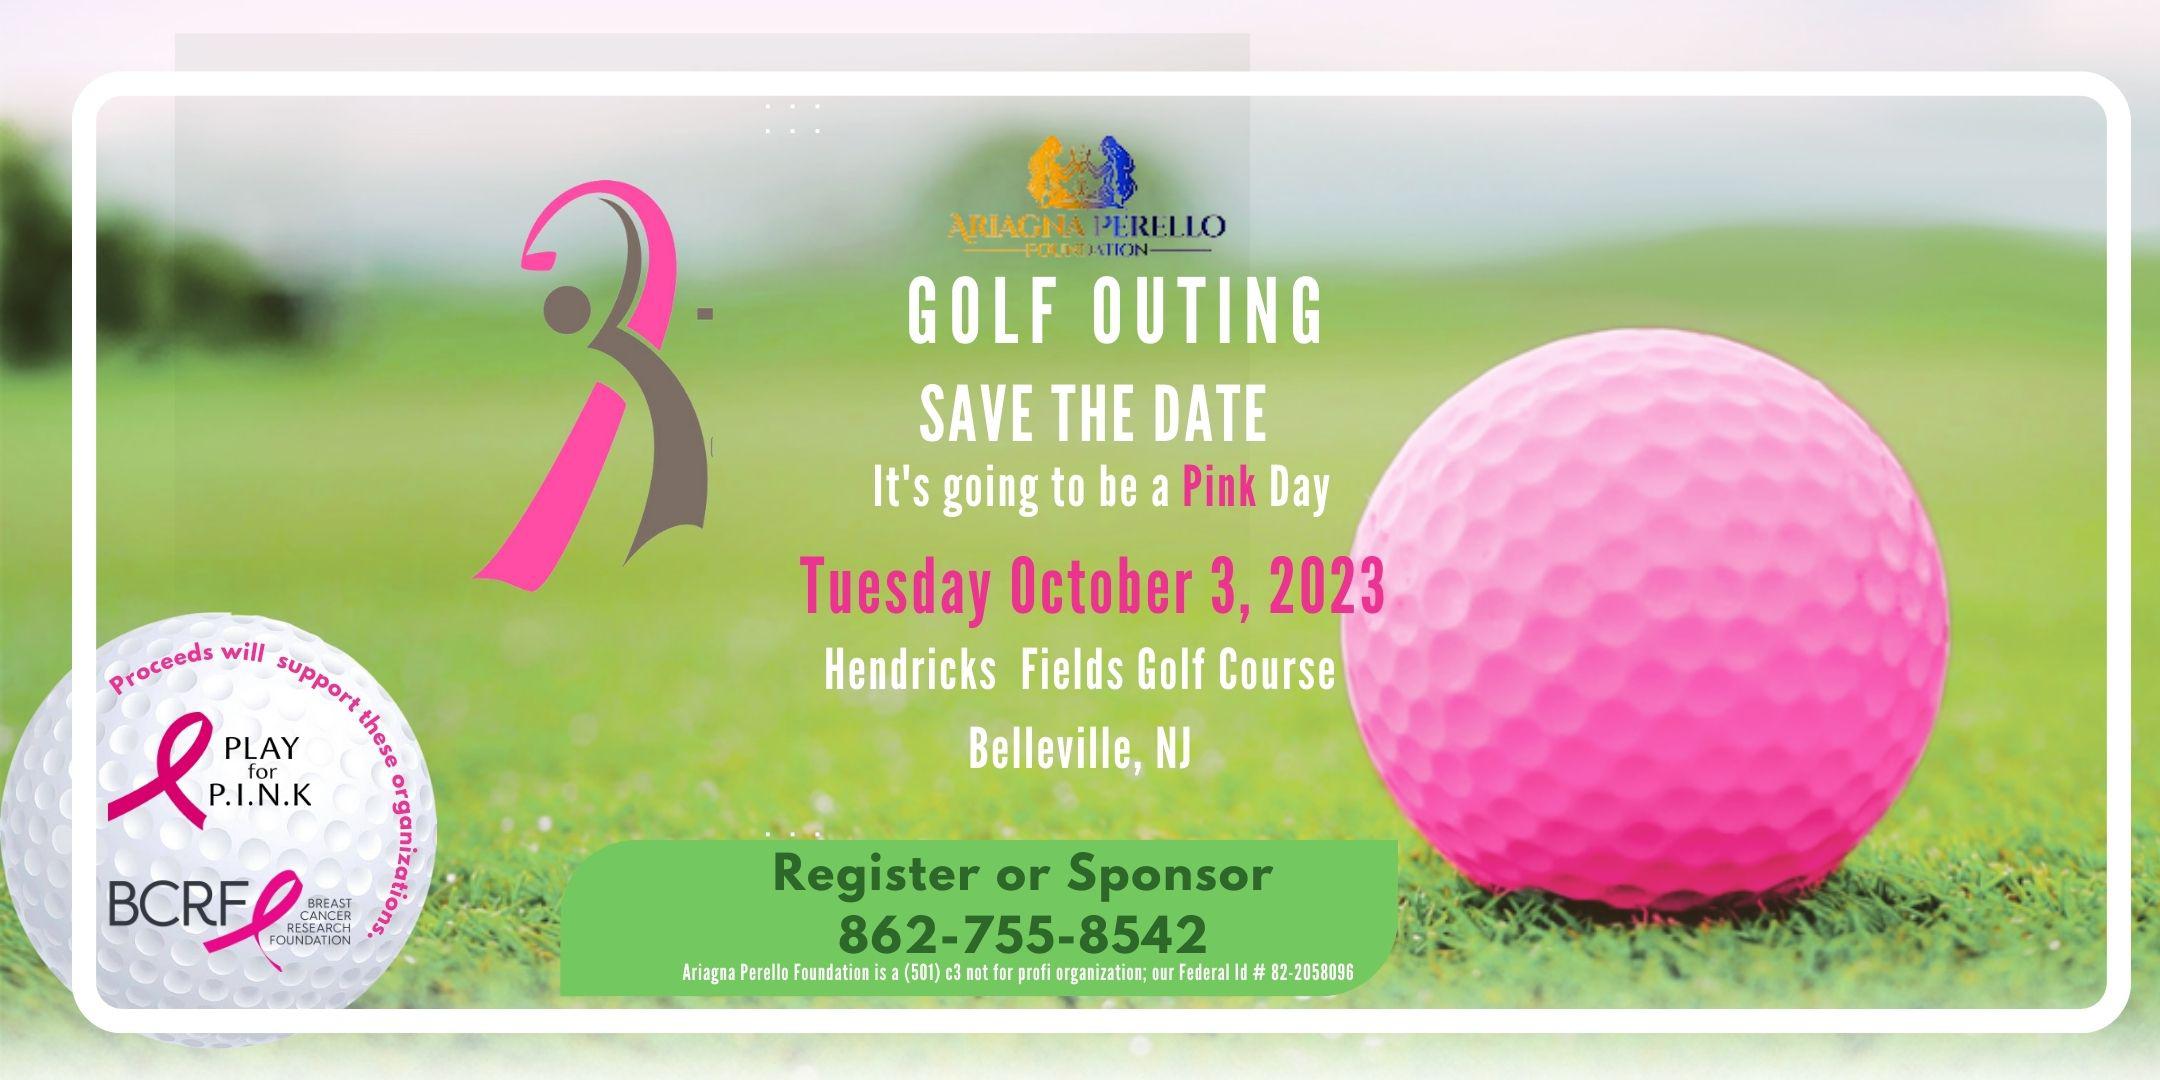 Swing for the Cure - Teeing Up Against Breast Cancer Golf Outing